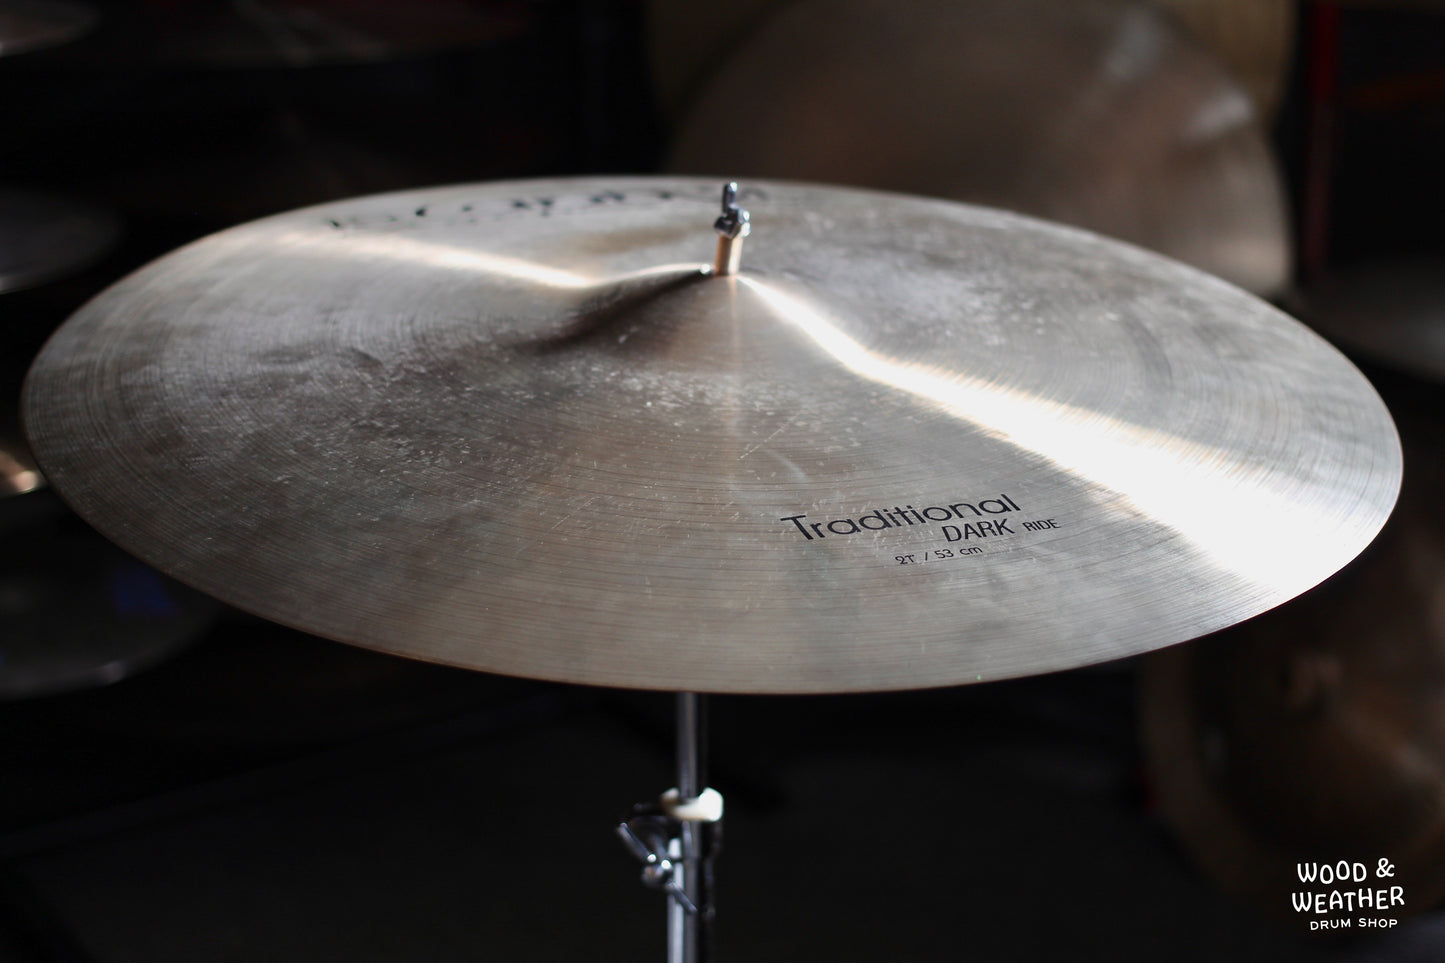 Used Istanbul Agop 21" Traditional Dark Ride Cymbal 2187g